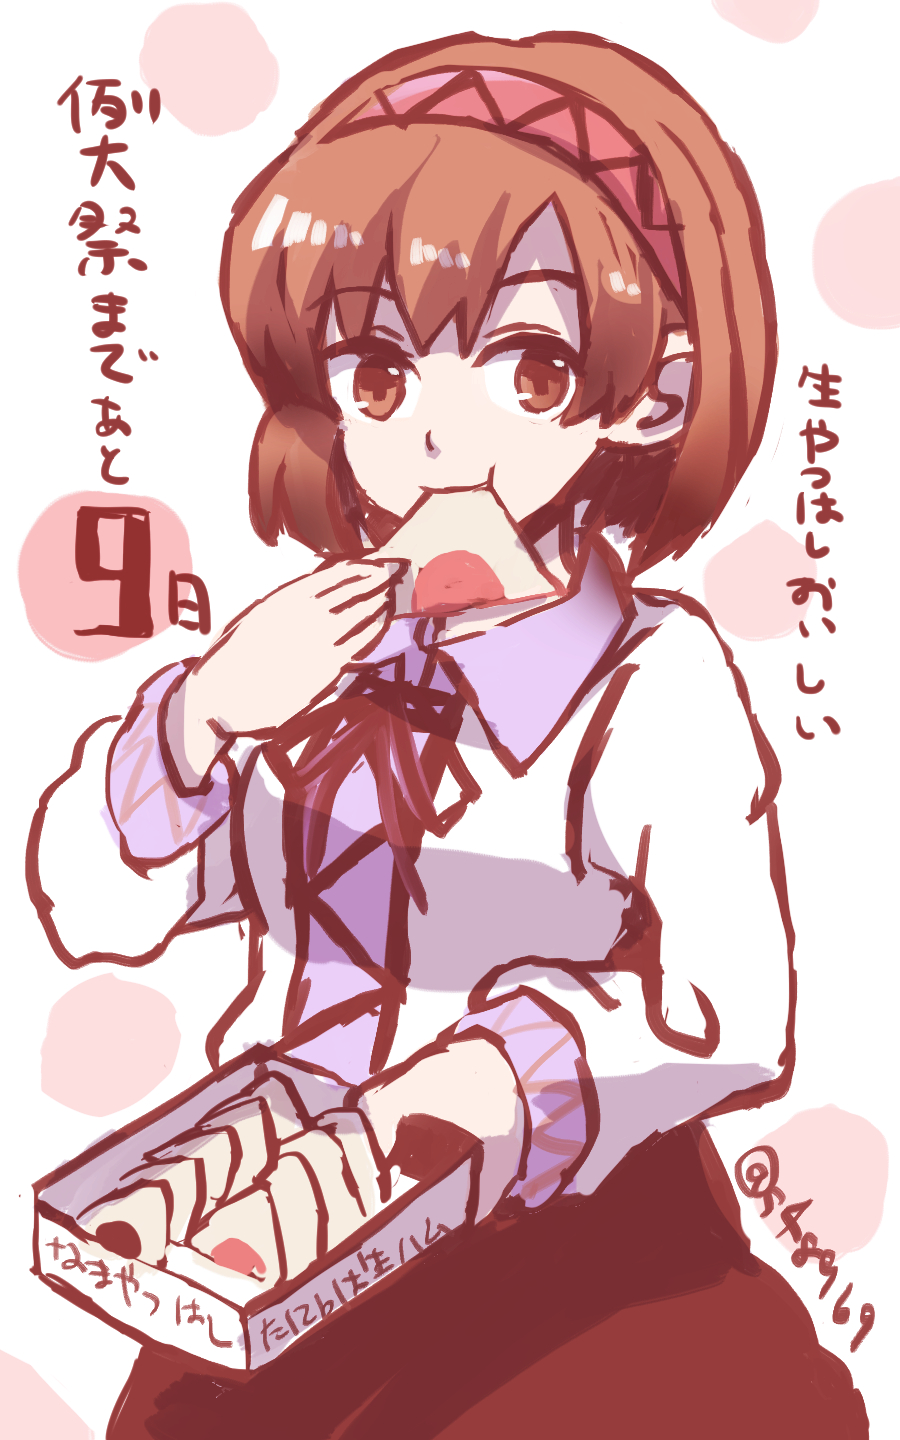 brown_eyes brown_hair eating female food high_resolution japanese_language light_background pixiv_id_1024475 short_hair solo spotted spotted_background text touhou tsukumo_yatsuhashi